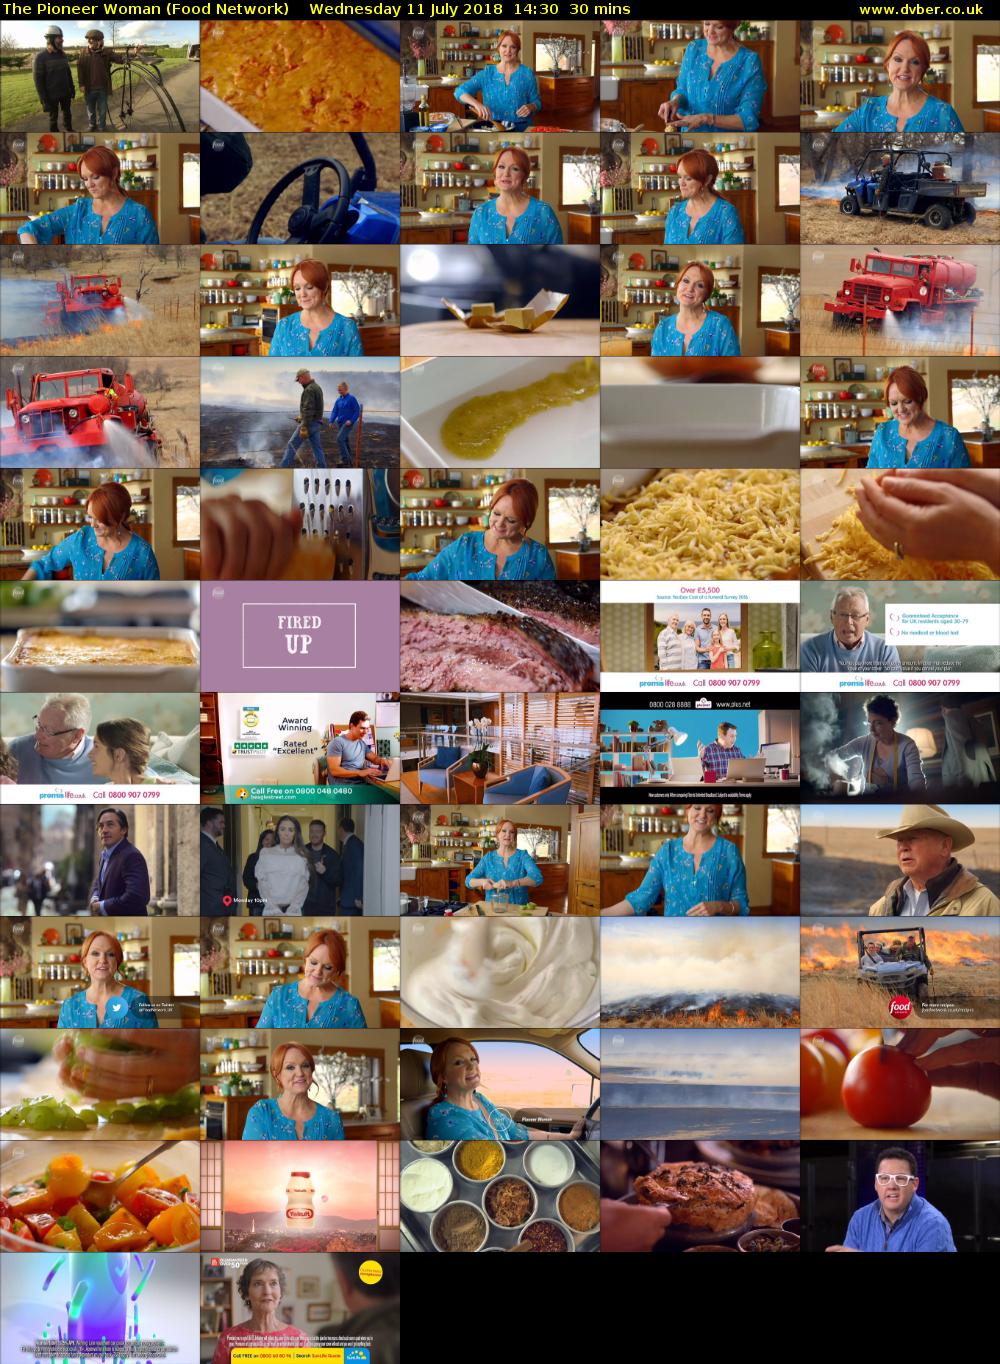 The Pioneer Woman (Food Network) Wednesday 11 July 2018 14:30 - 15:00